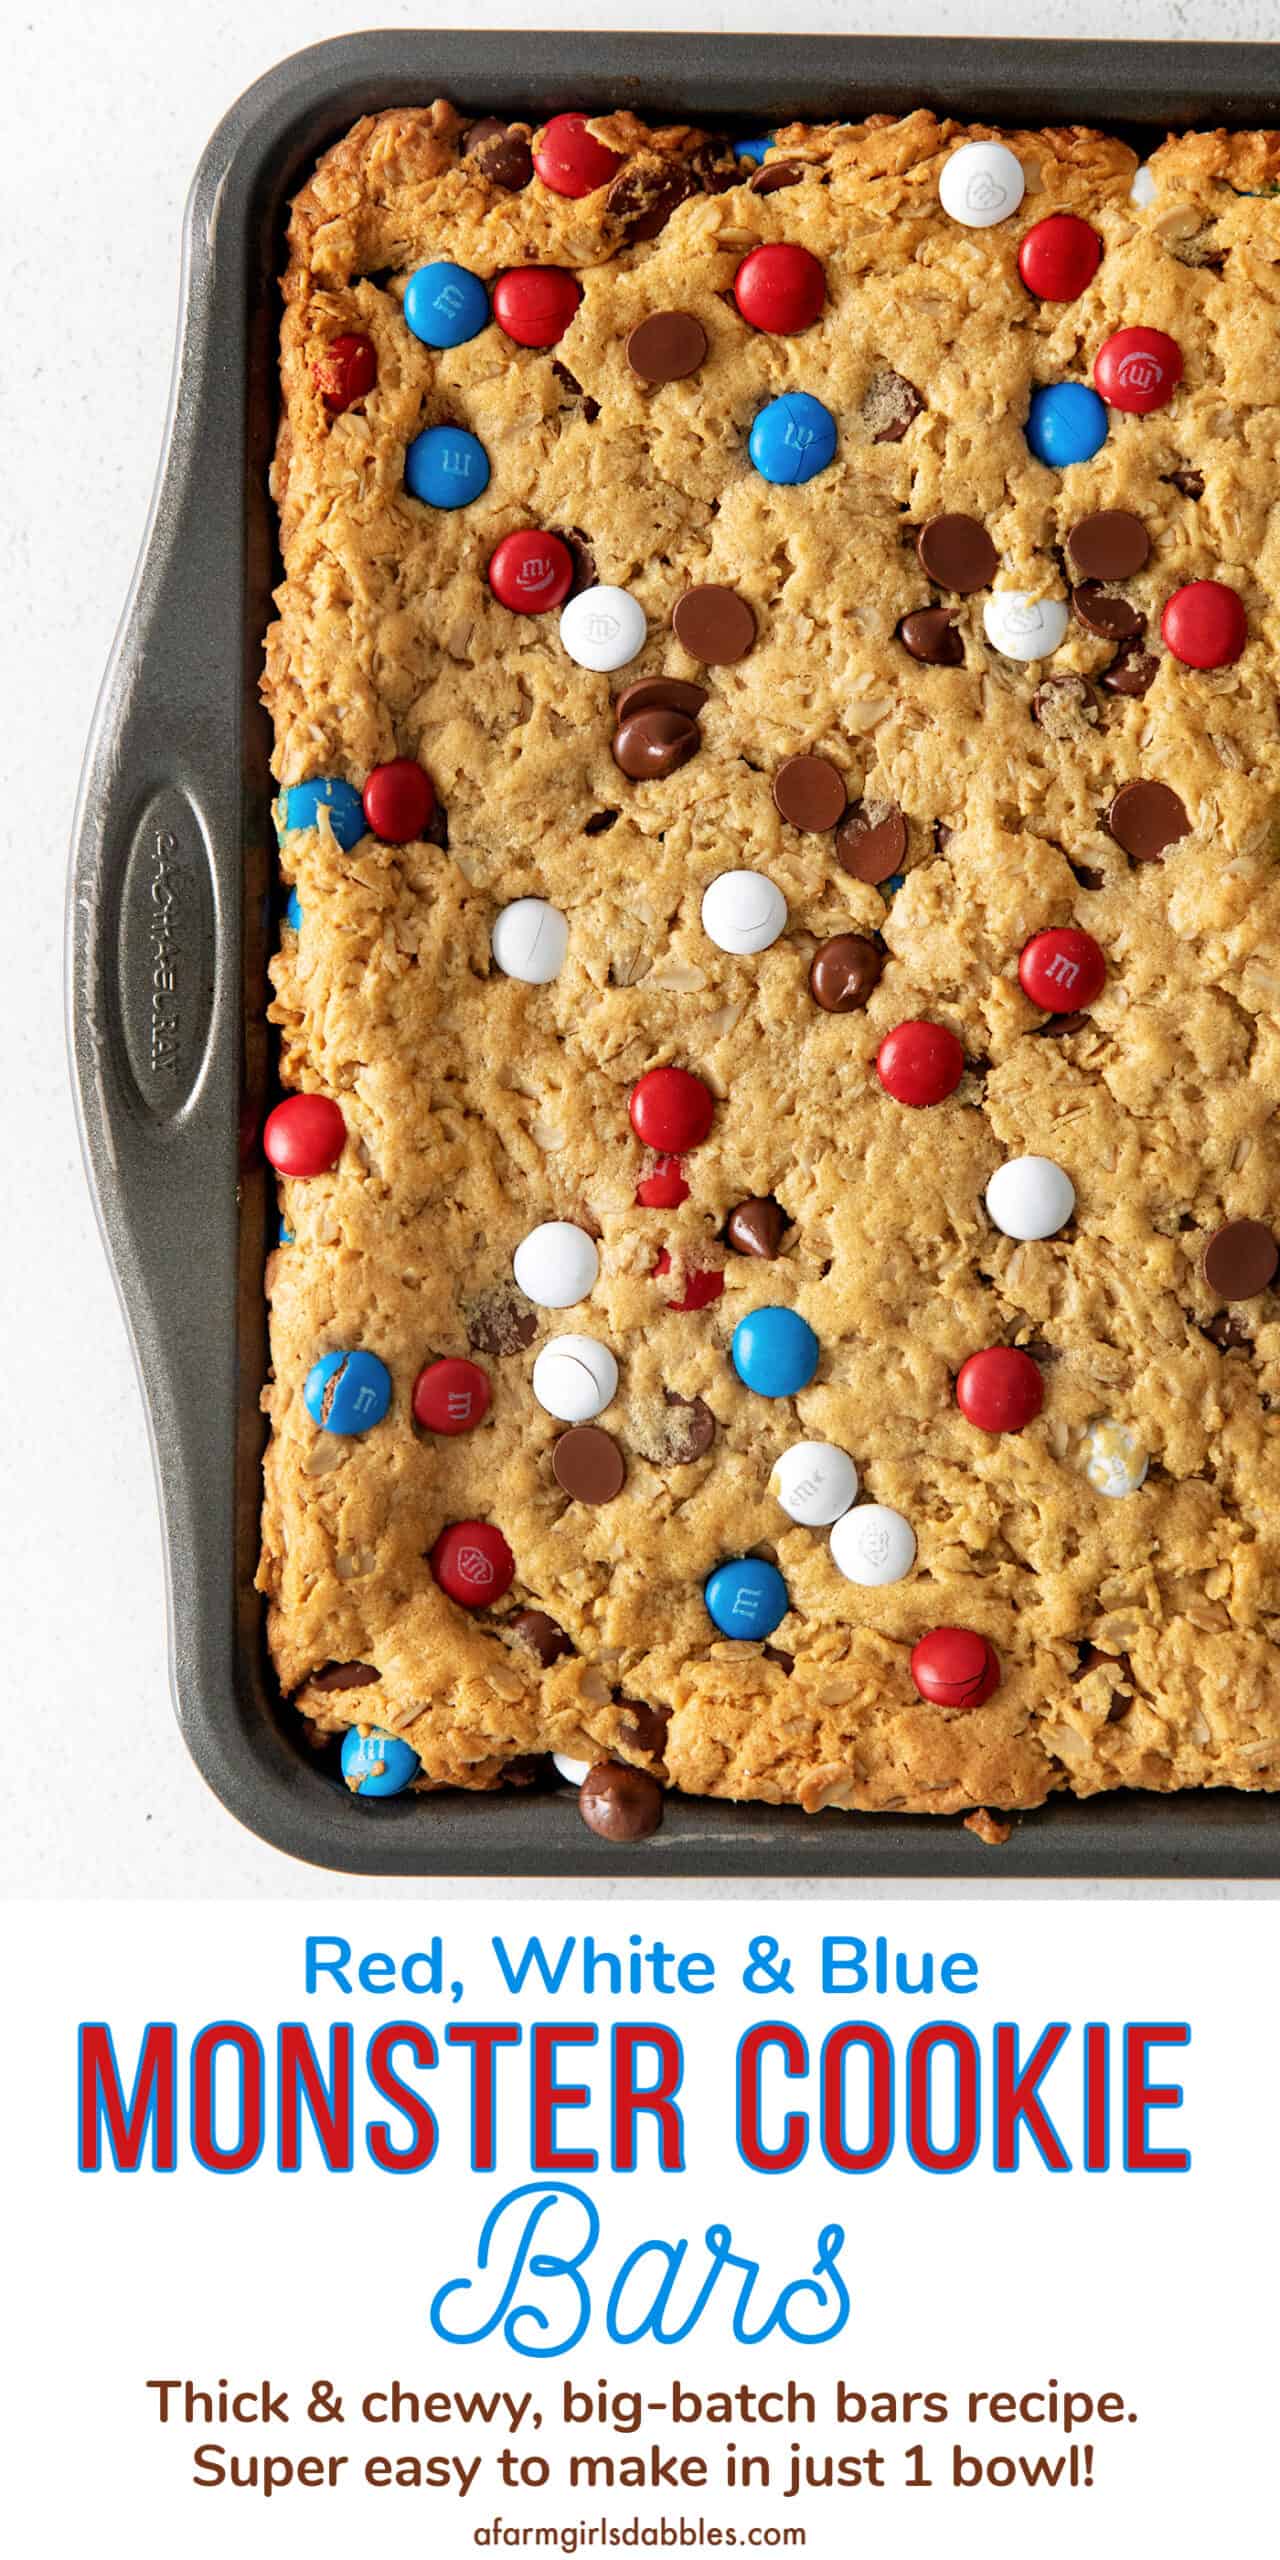 Pinterest image for red, white & blue monster cookie bars for the 4th of July